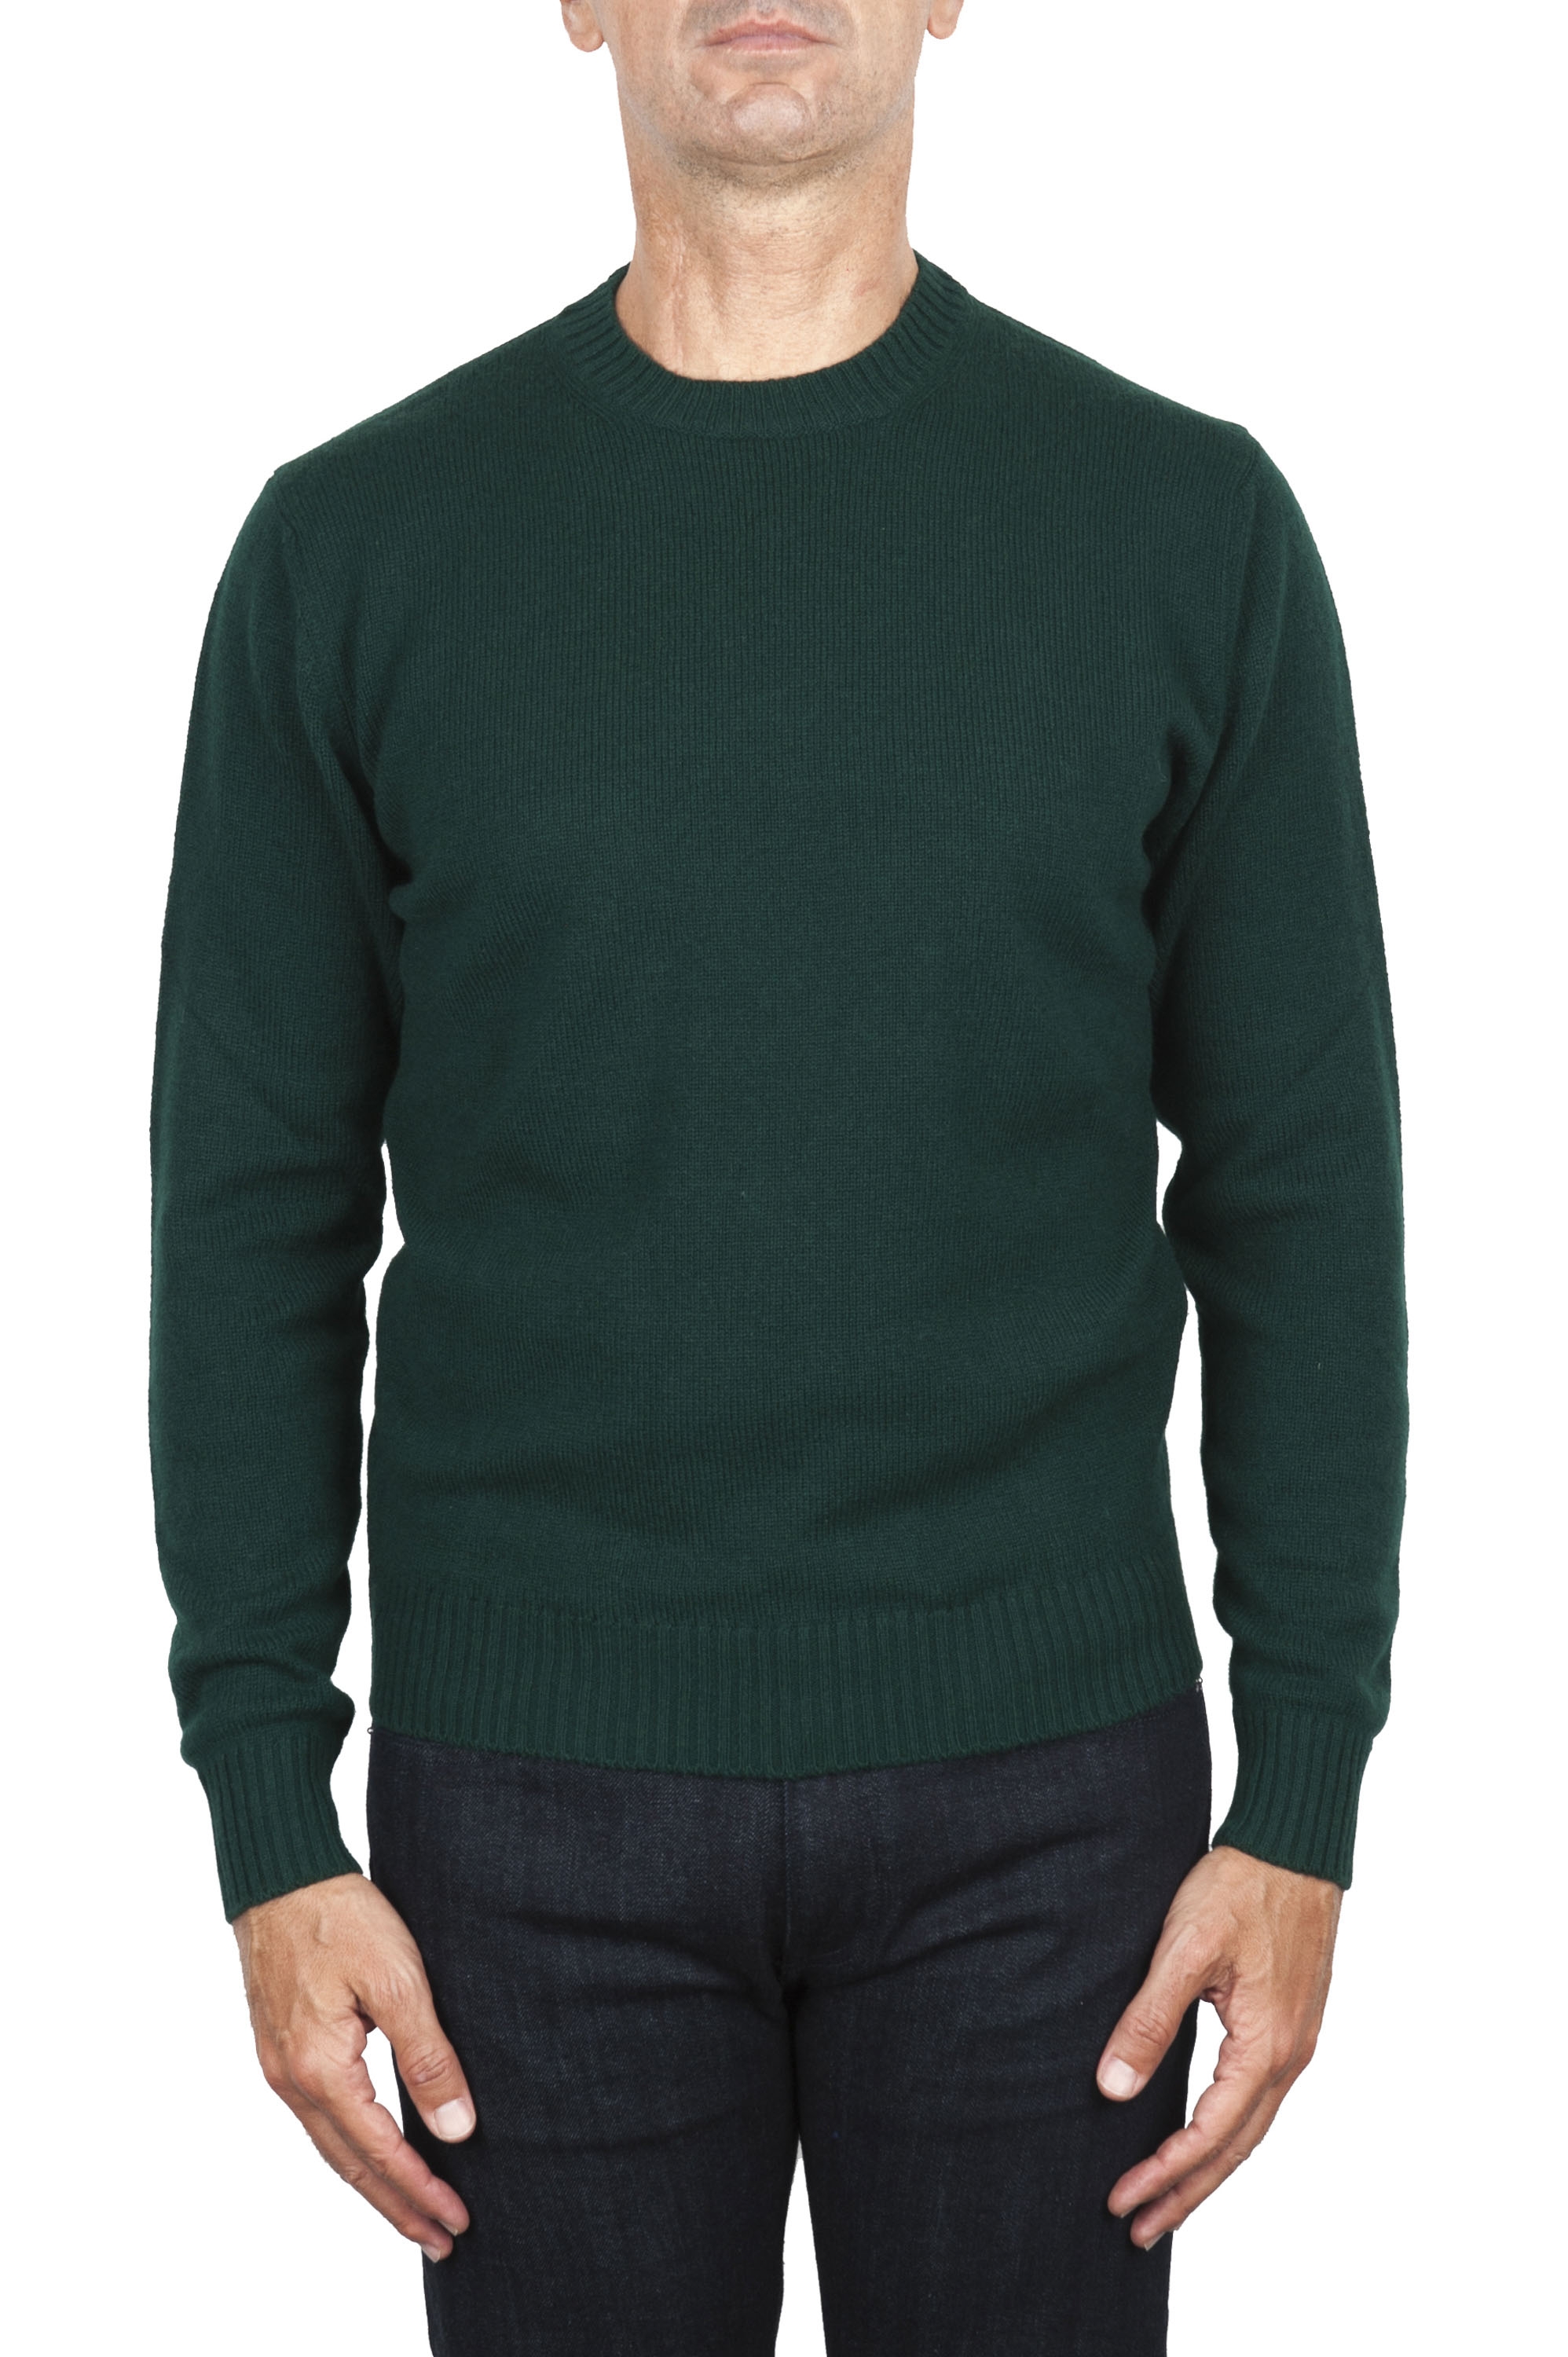 SBU 03001_2020AW Green wool and cashmere blend crew neck sweater 01